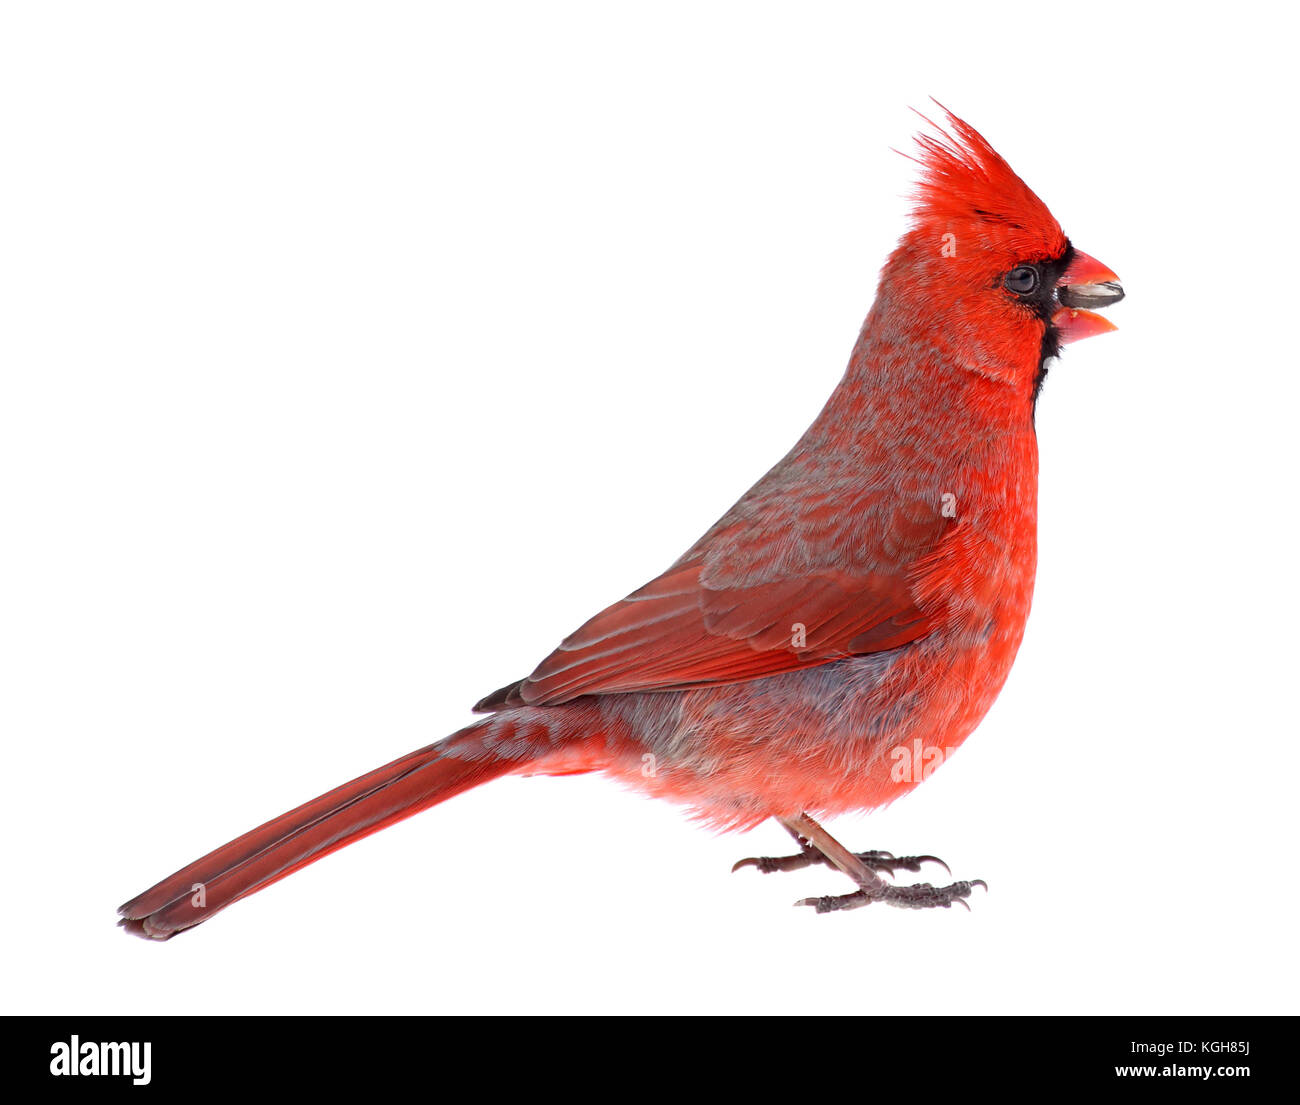 Male northern cardinal, Cardinalis cardinalis, eating a seed isolated on white Stock Photo